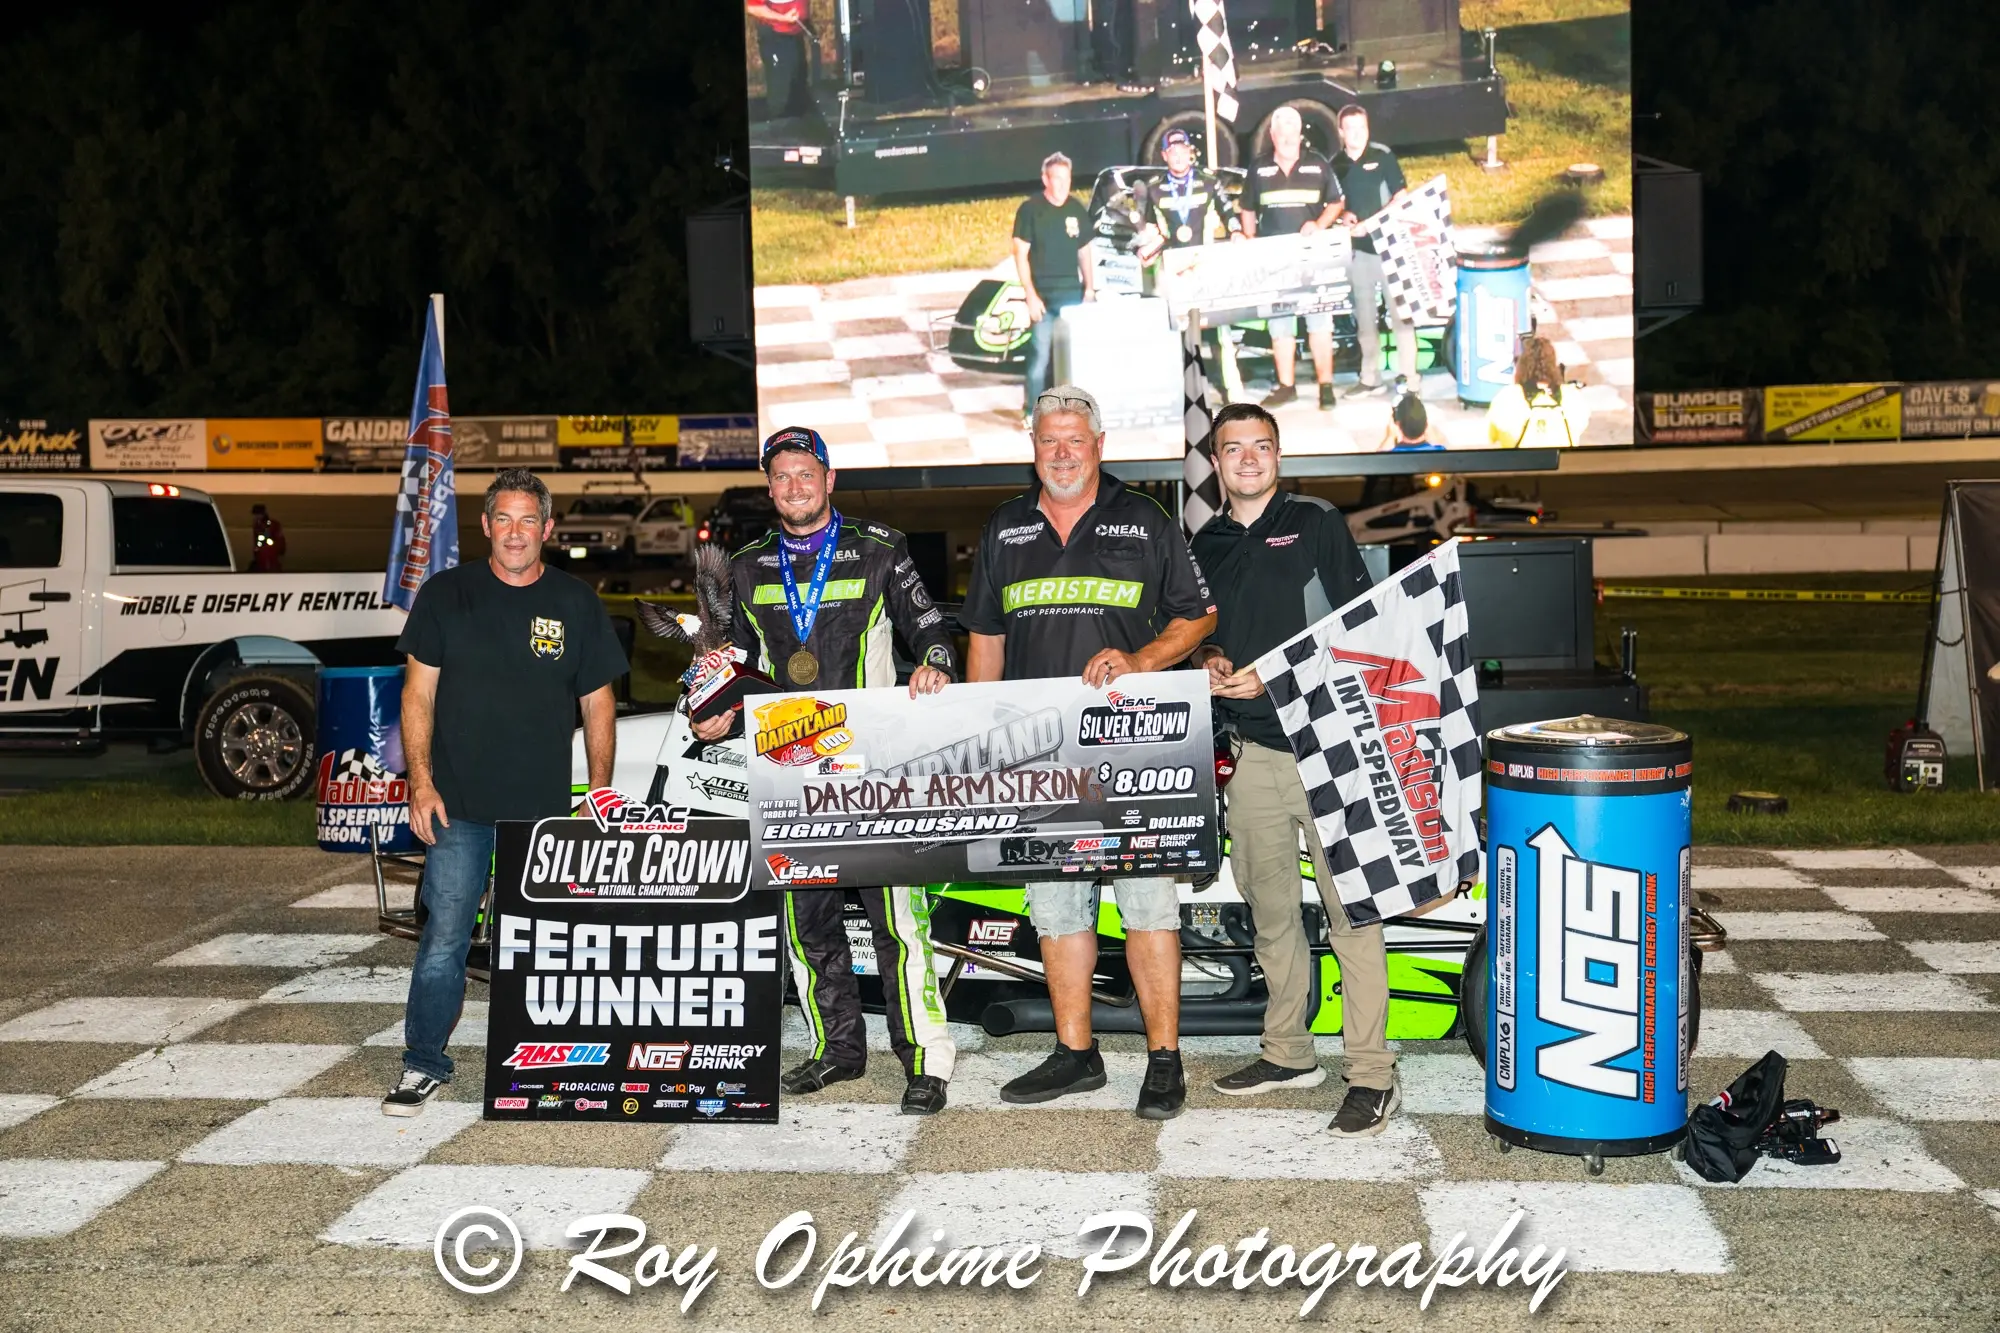 Featured image for “HAPPY MADISON! ARMSTRONG ARRIVES WITH FIRST USAC SILVER CROWN WIN”